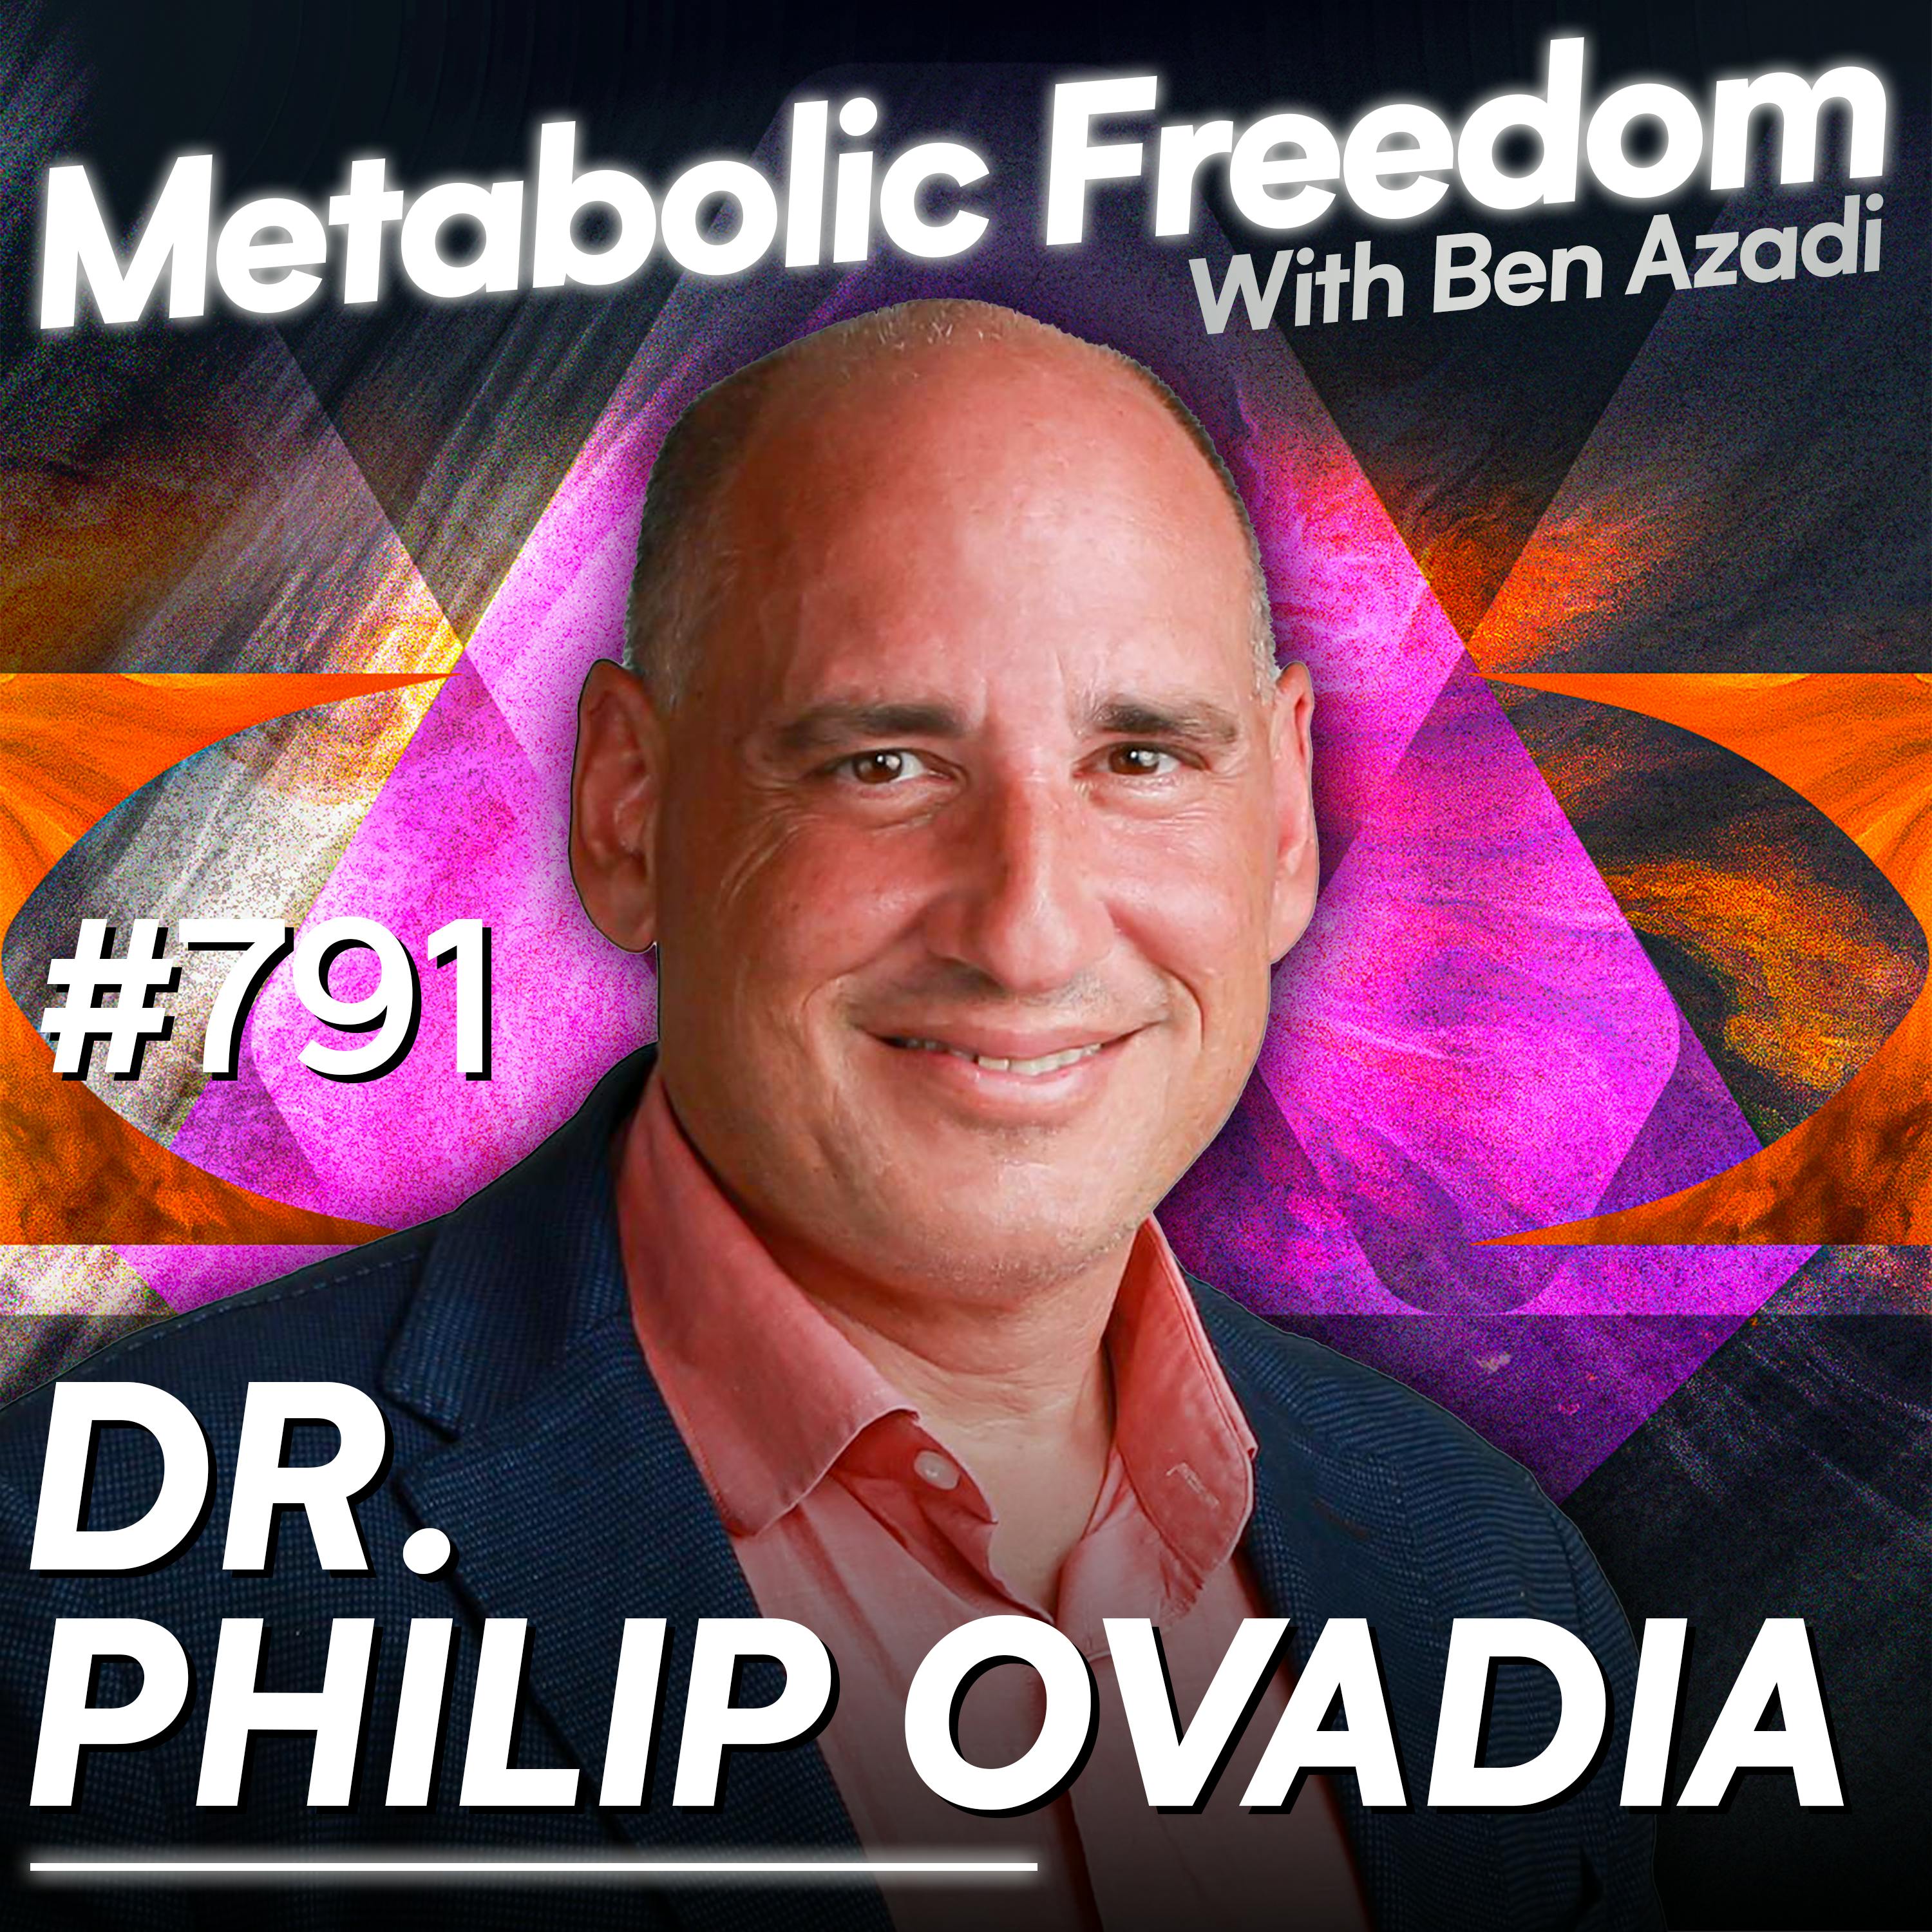 #791 #1 Heart Surgeon: The Worst Food Destroying Your Heart & Causing Disease! with Dr. Philip Ovadia